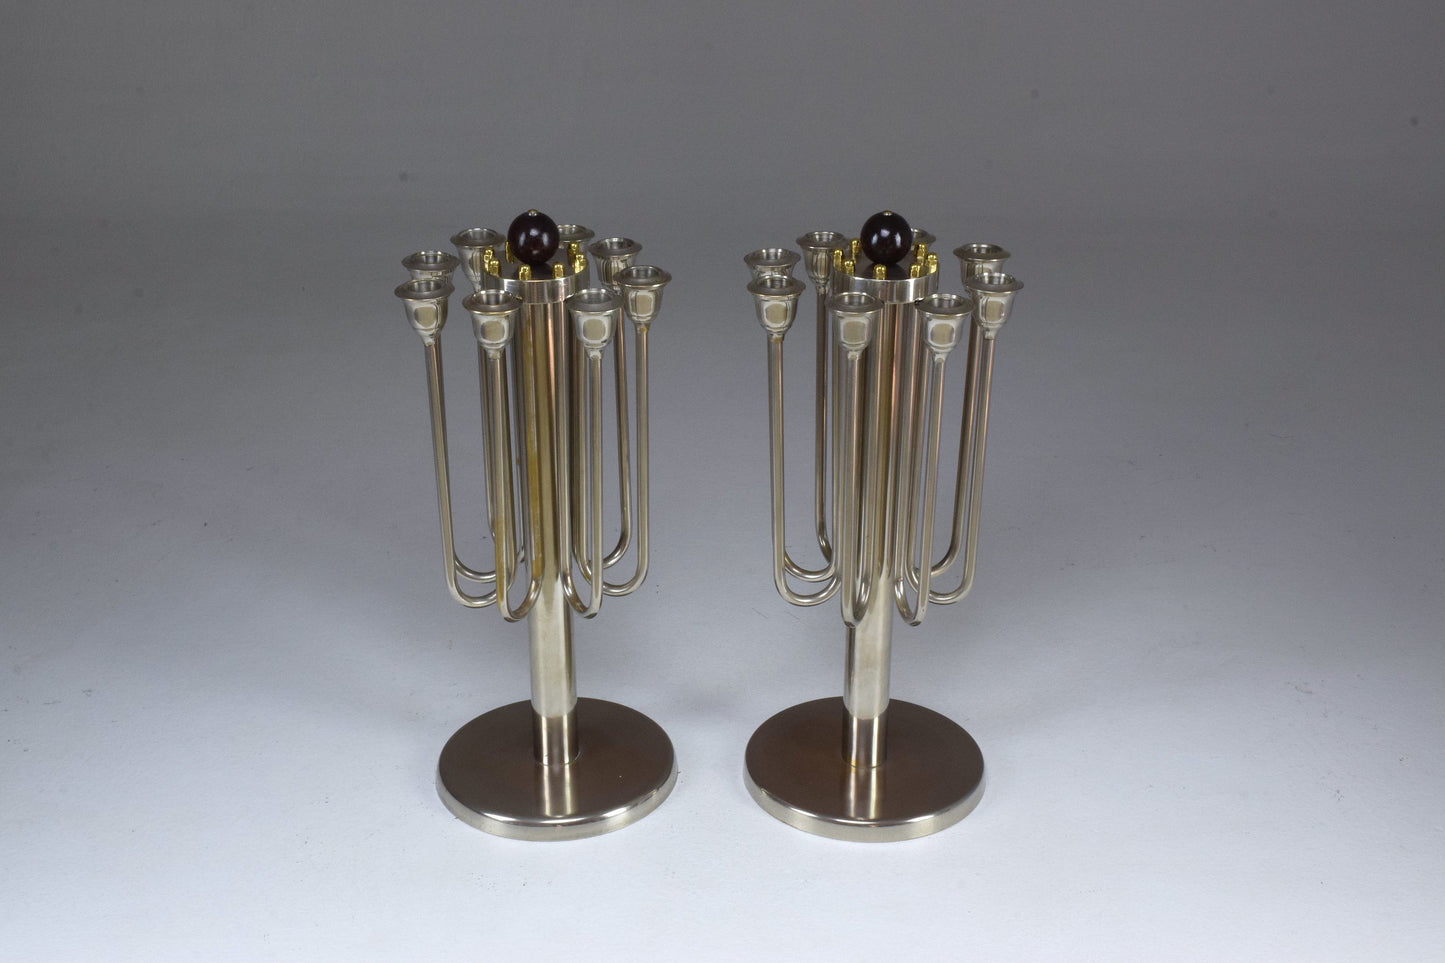 Pair of French Art Deco Candleholders, 1930s - Spirit Gallery 